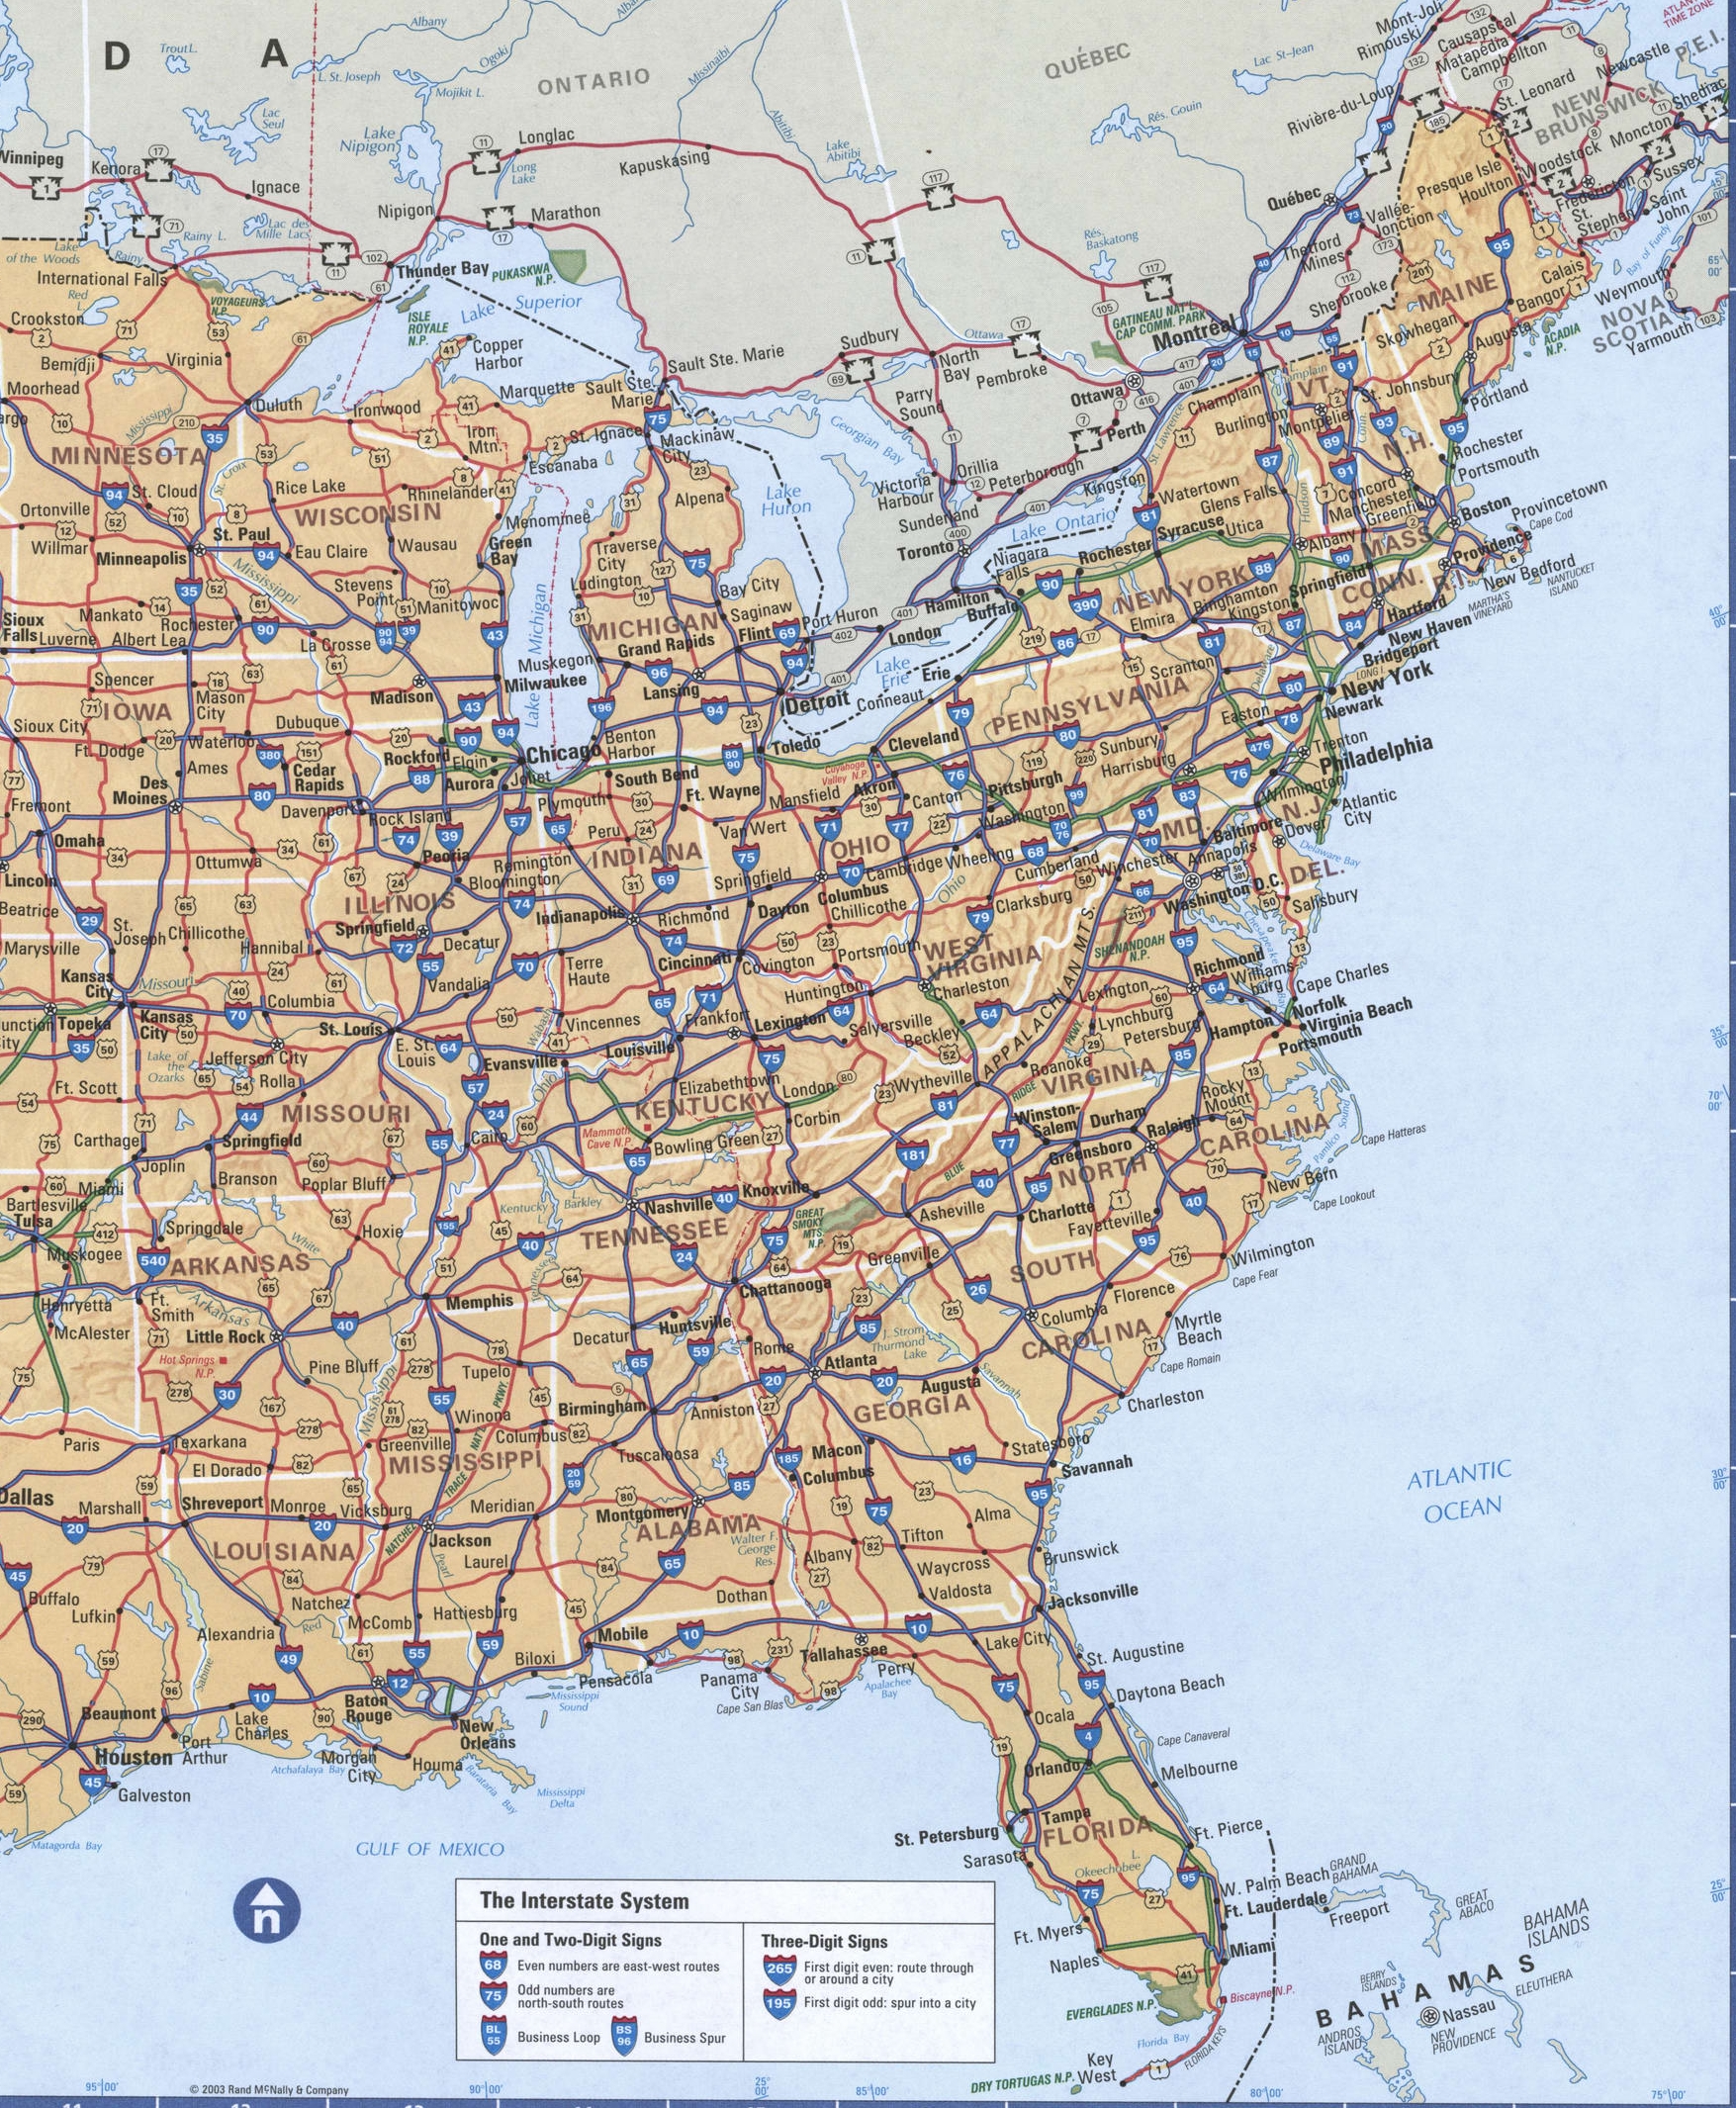 The Eastern United States - detailed map